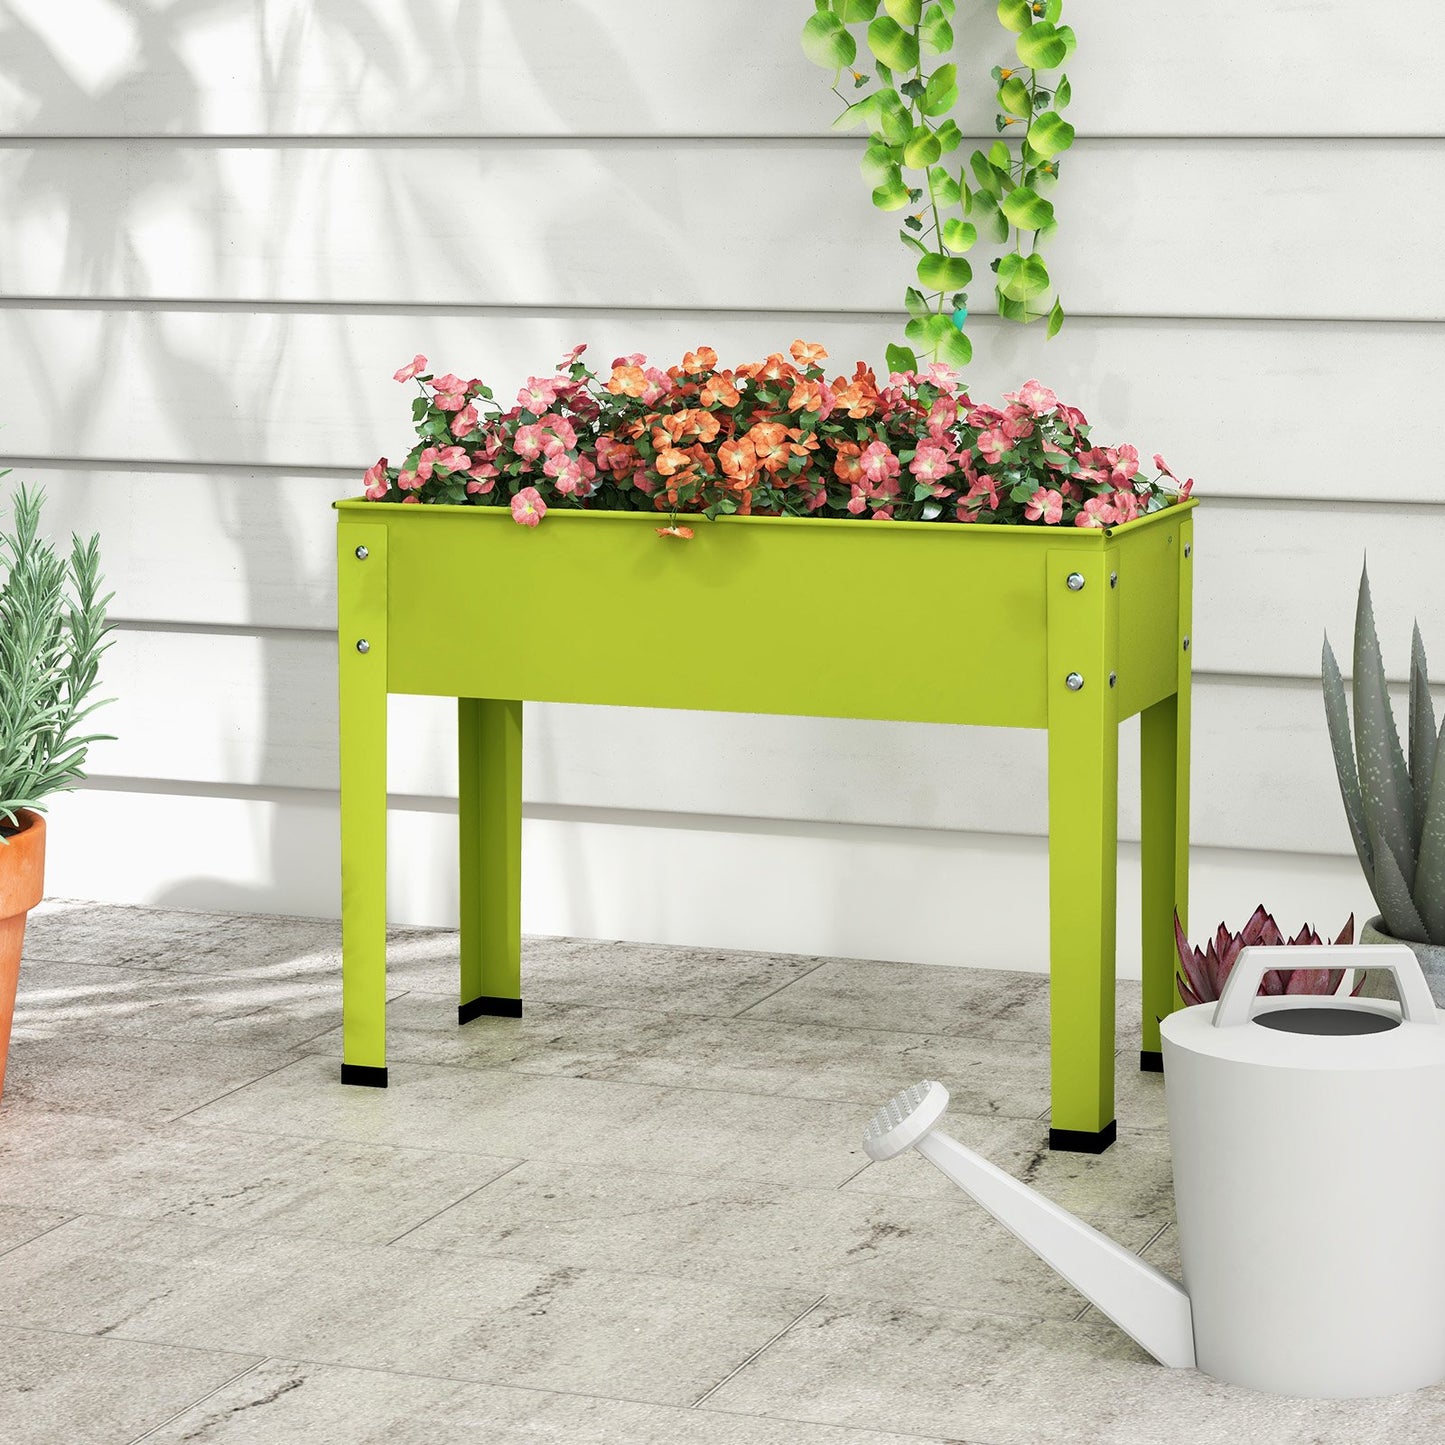 Metal Raised Garden Bed with Legs and Drainage Hole-24 x 11 x 18 inches, Green - Gallery Canada